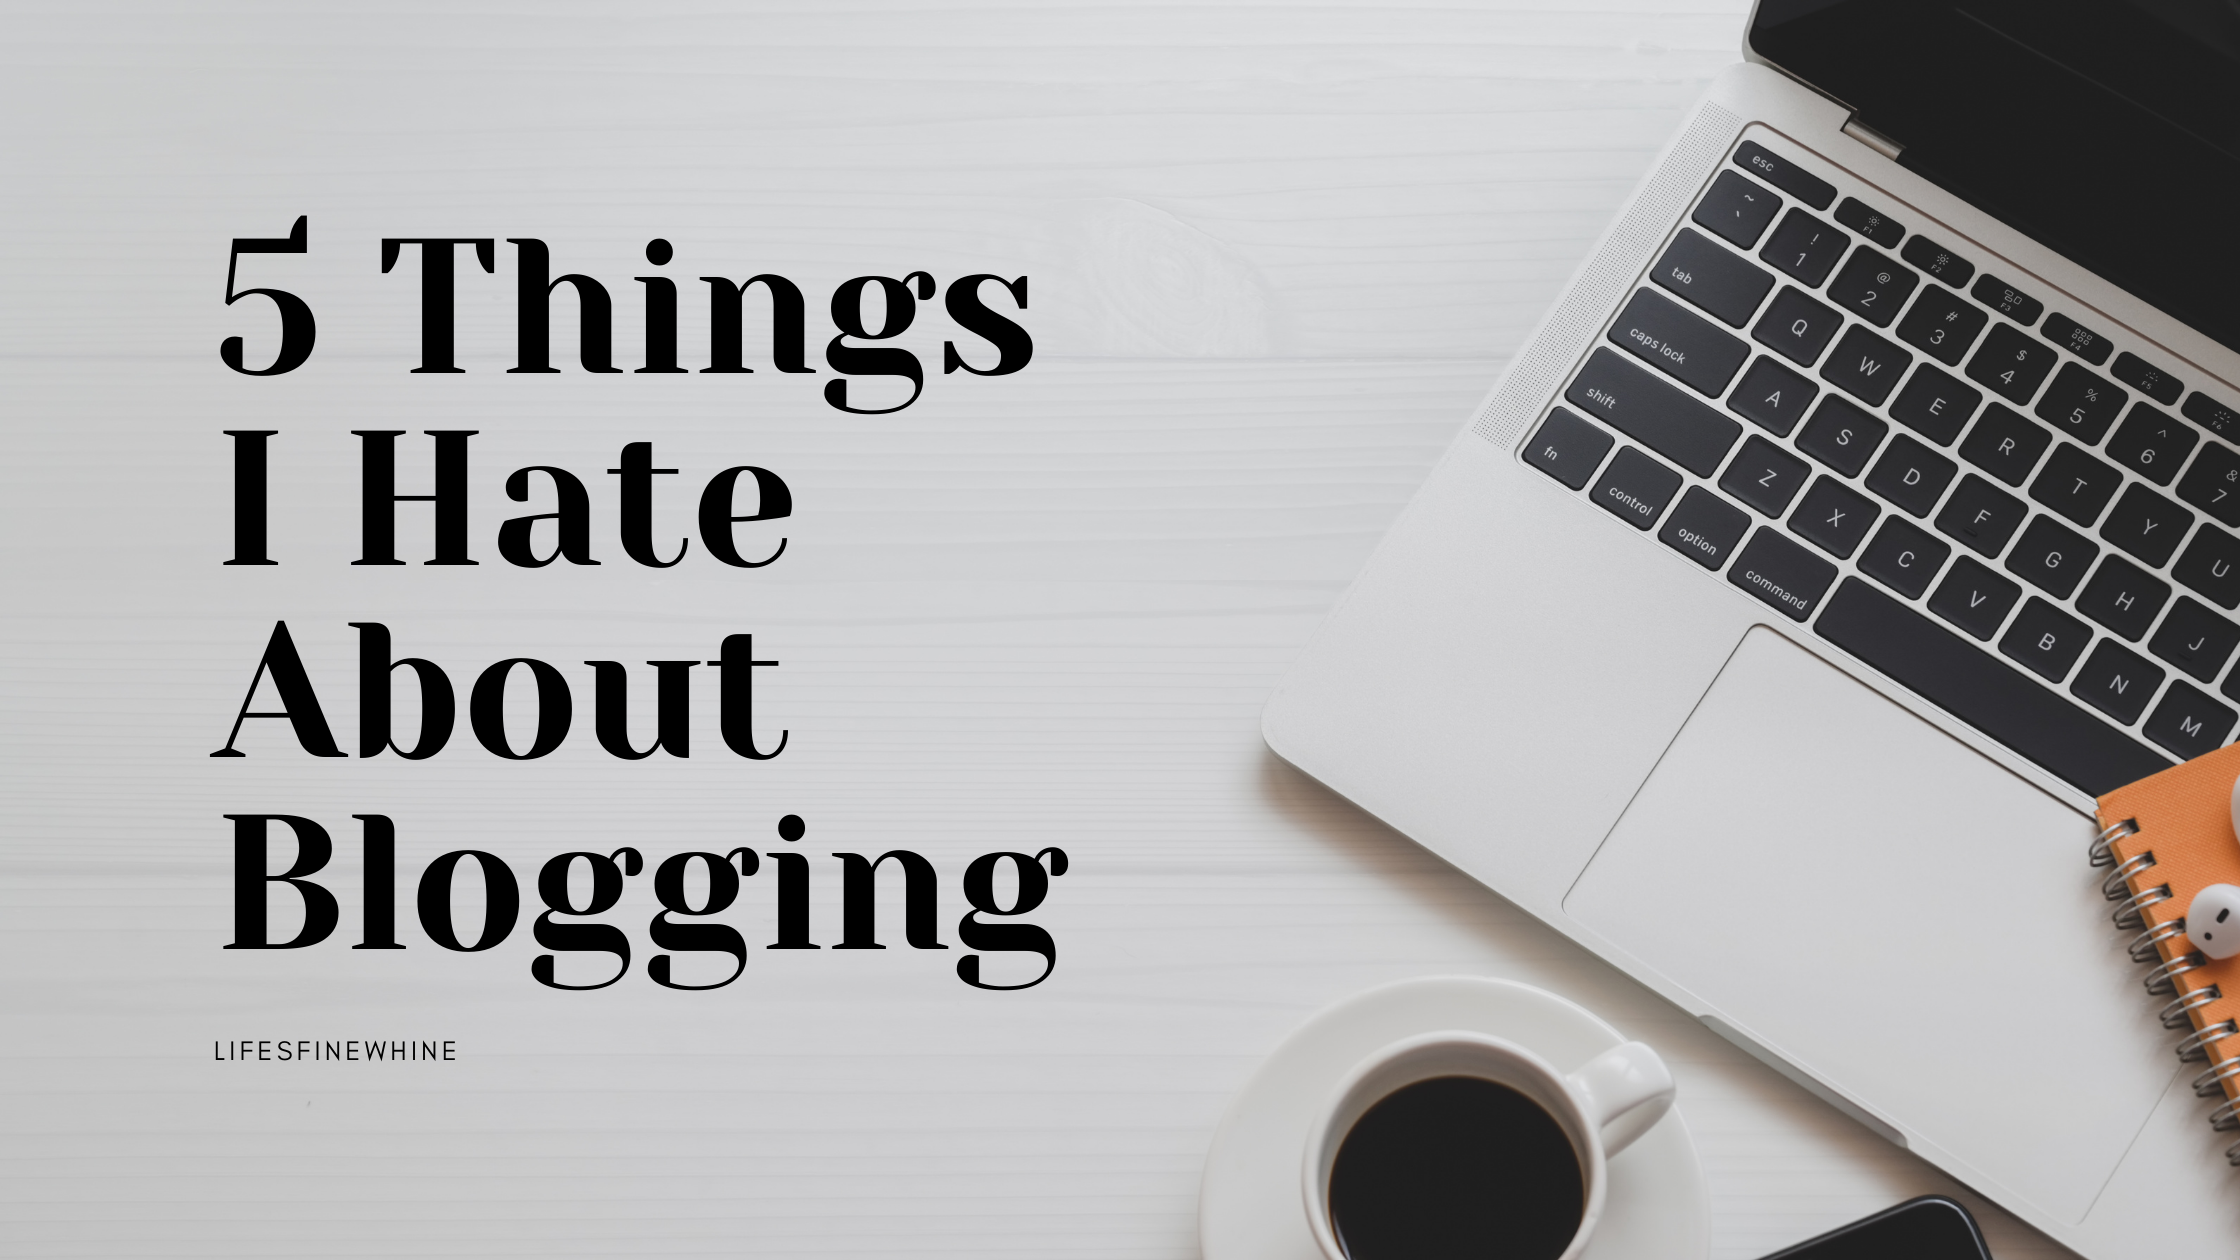 5 Things I Hate About Blogging